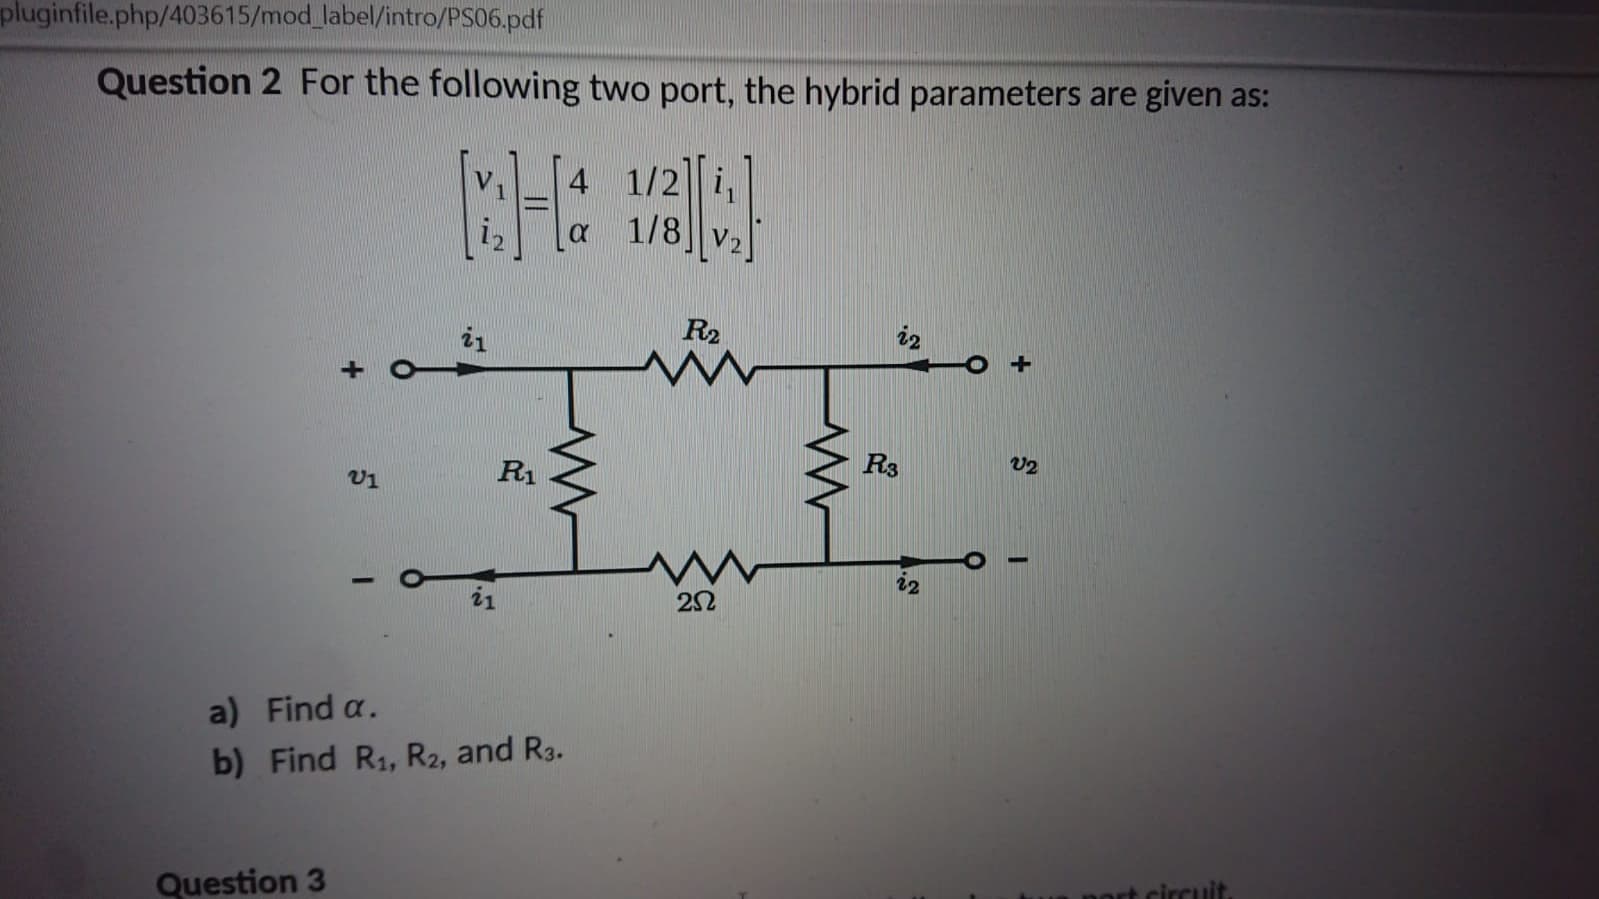 Question 2 For the following two port, the hybrid parameters are given
4 1/2 i,
1/8
V
R2
i2
i1
R3
V2
R1
i2
i1
a) Find a.
b) Find R1, R2, and R3.
